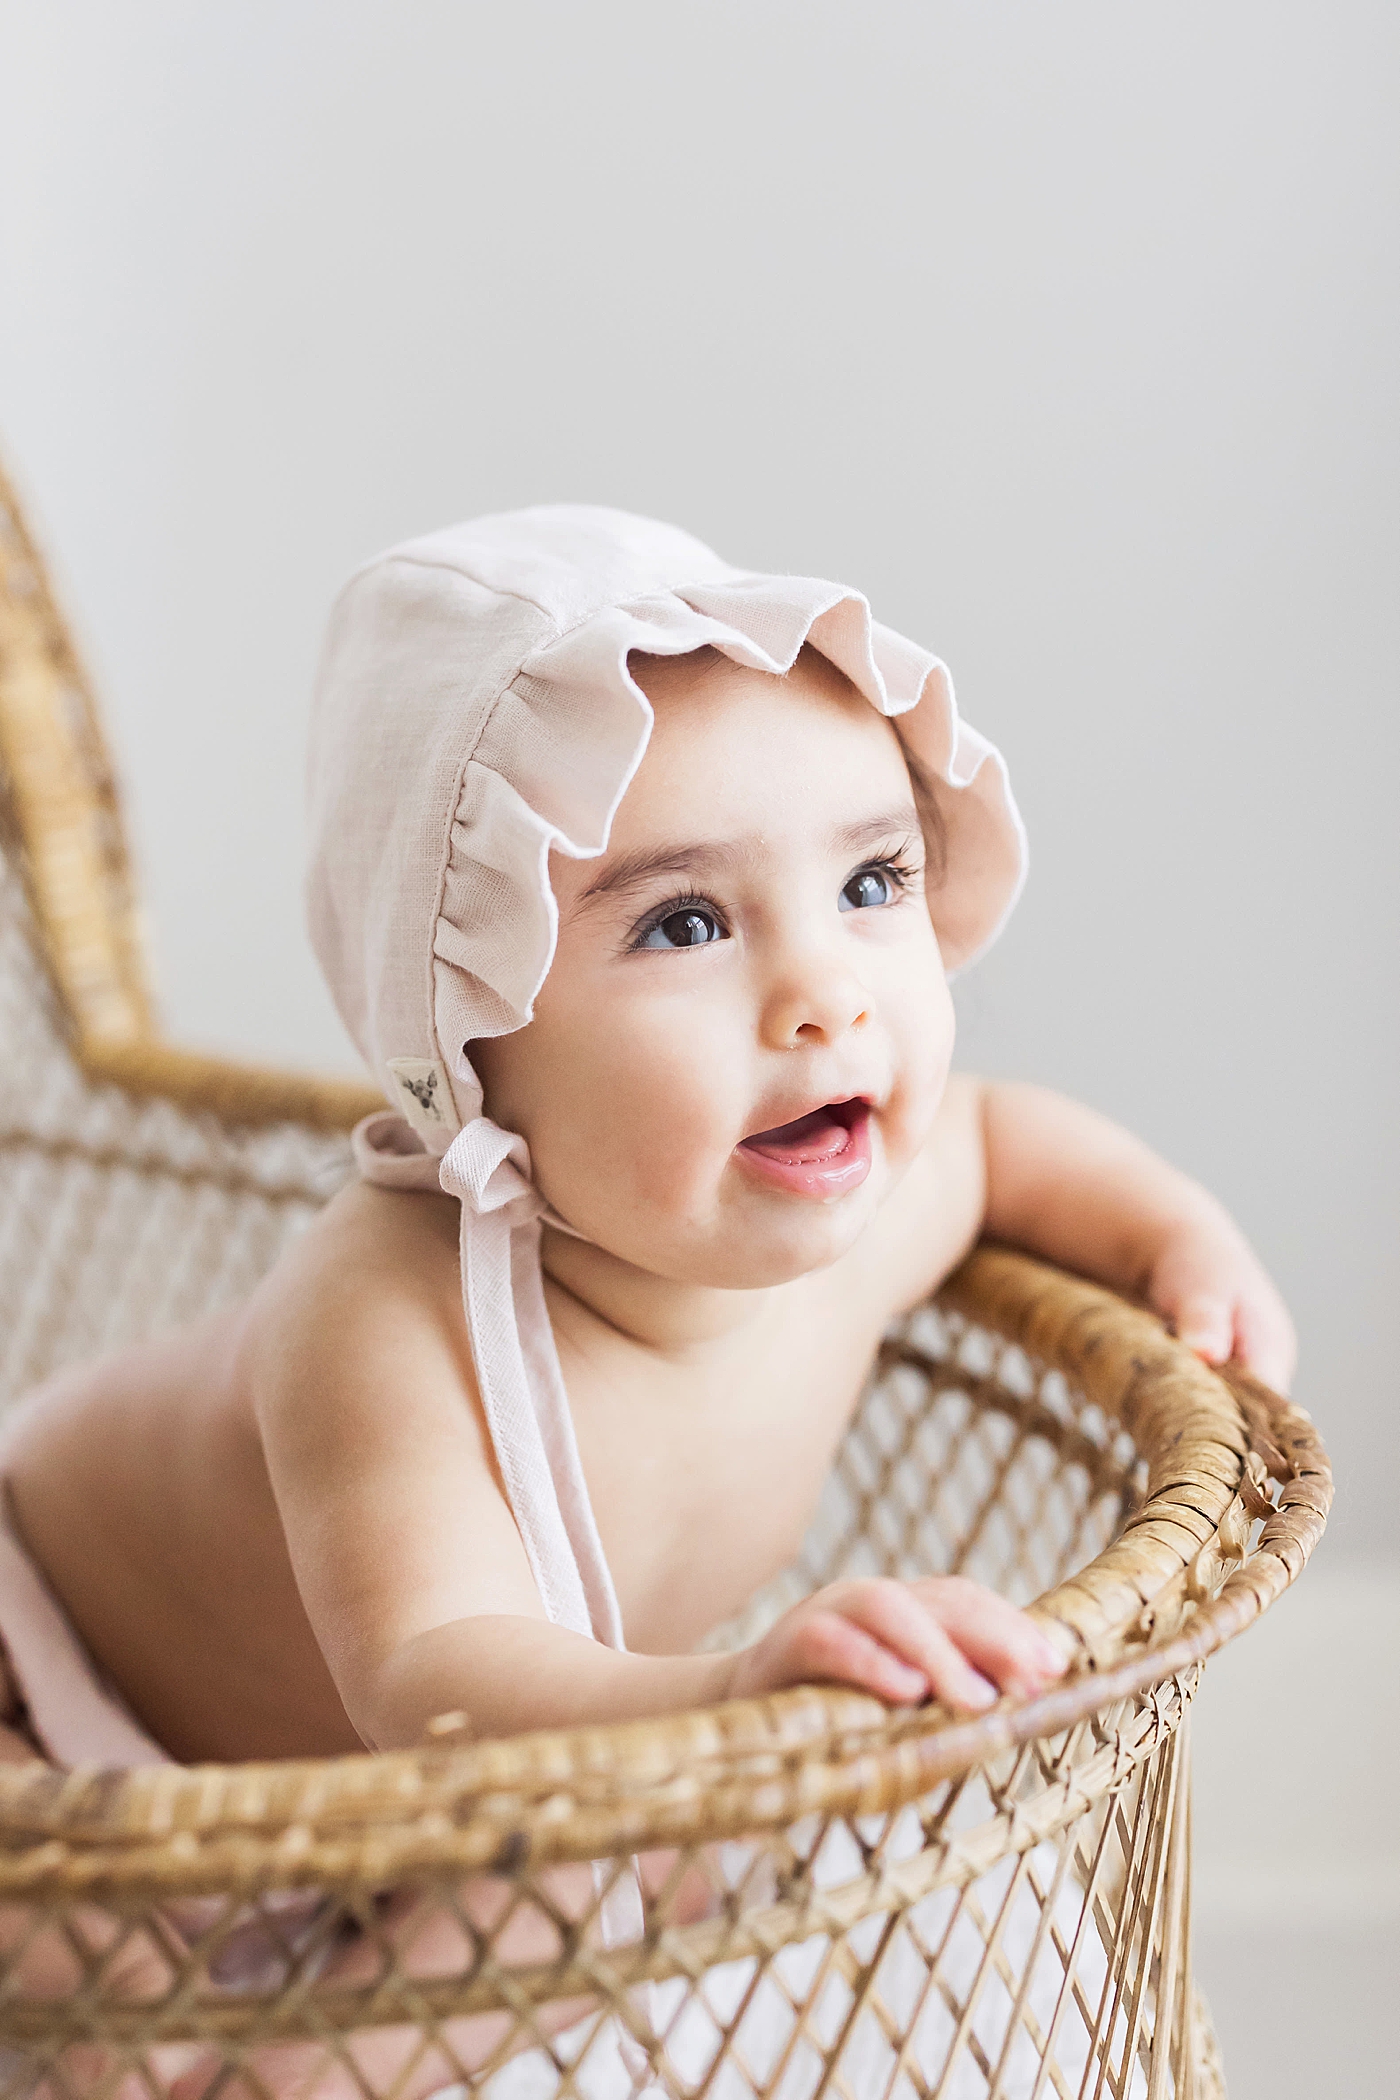 Six month old in light pink bonnet. Photo by Fresh Light Photography.